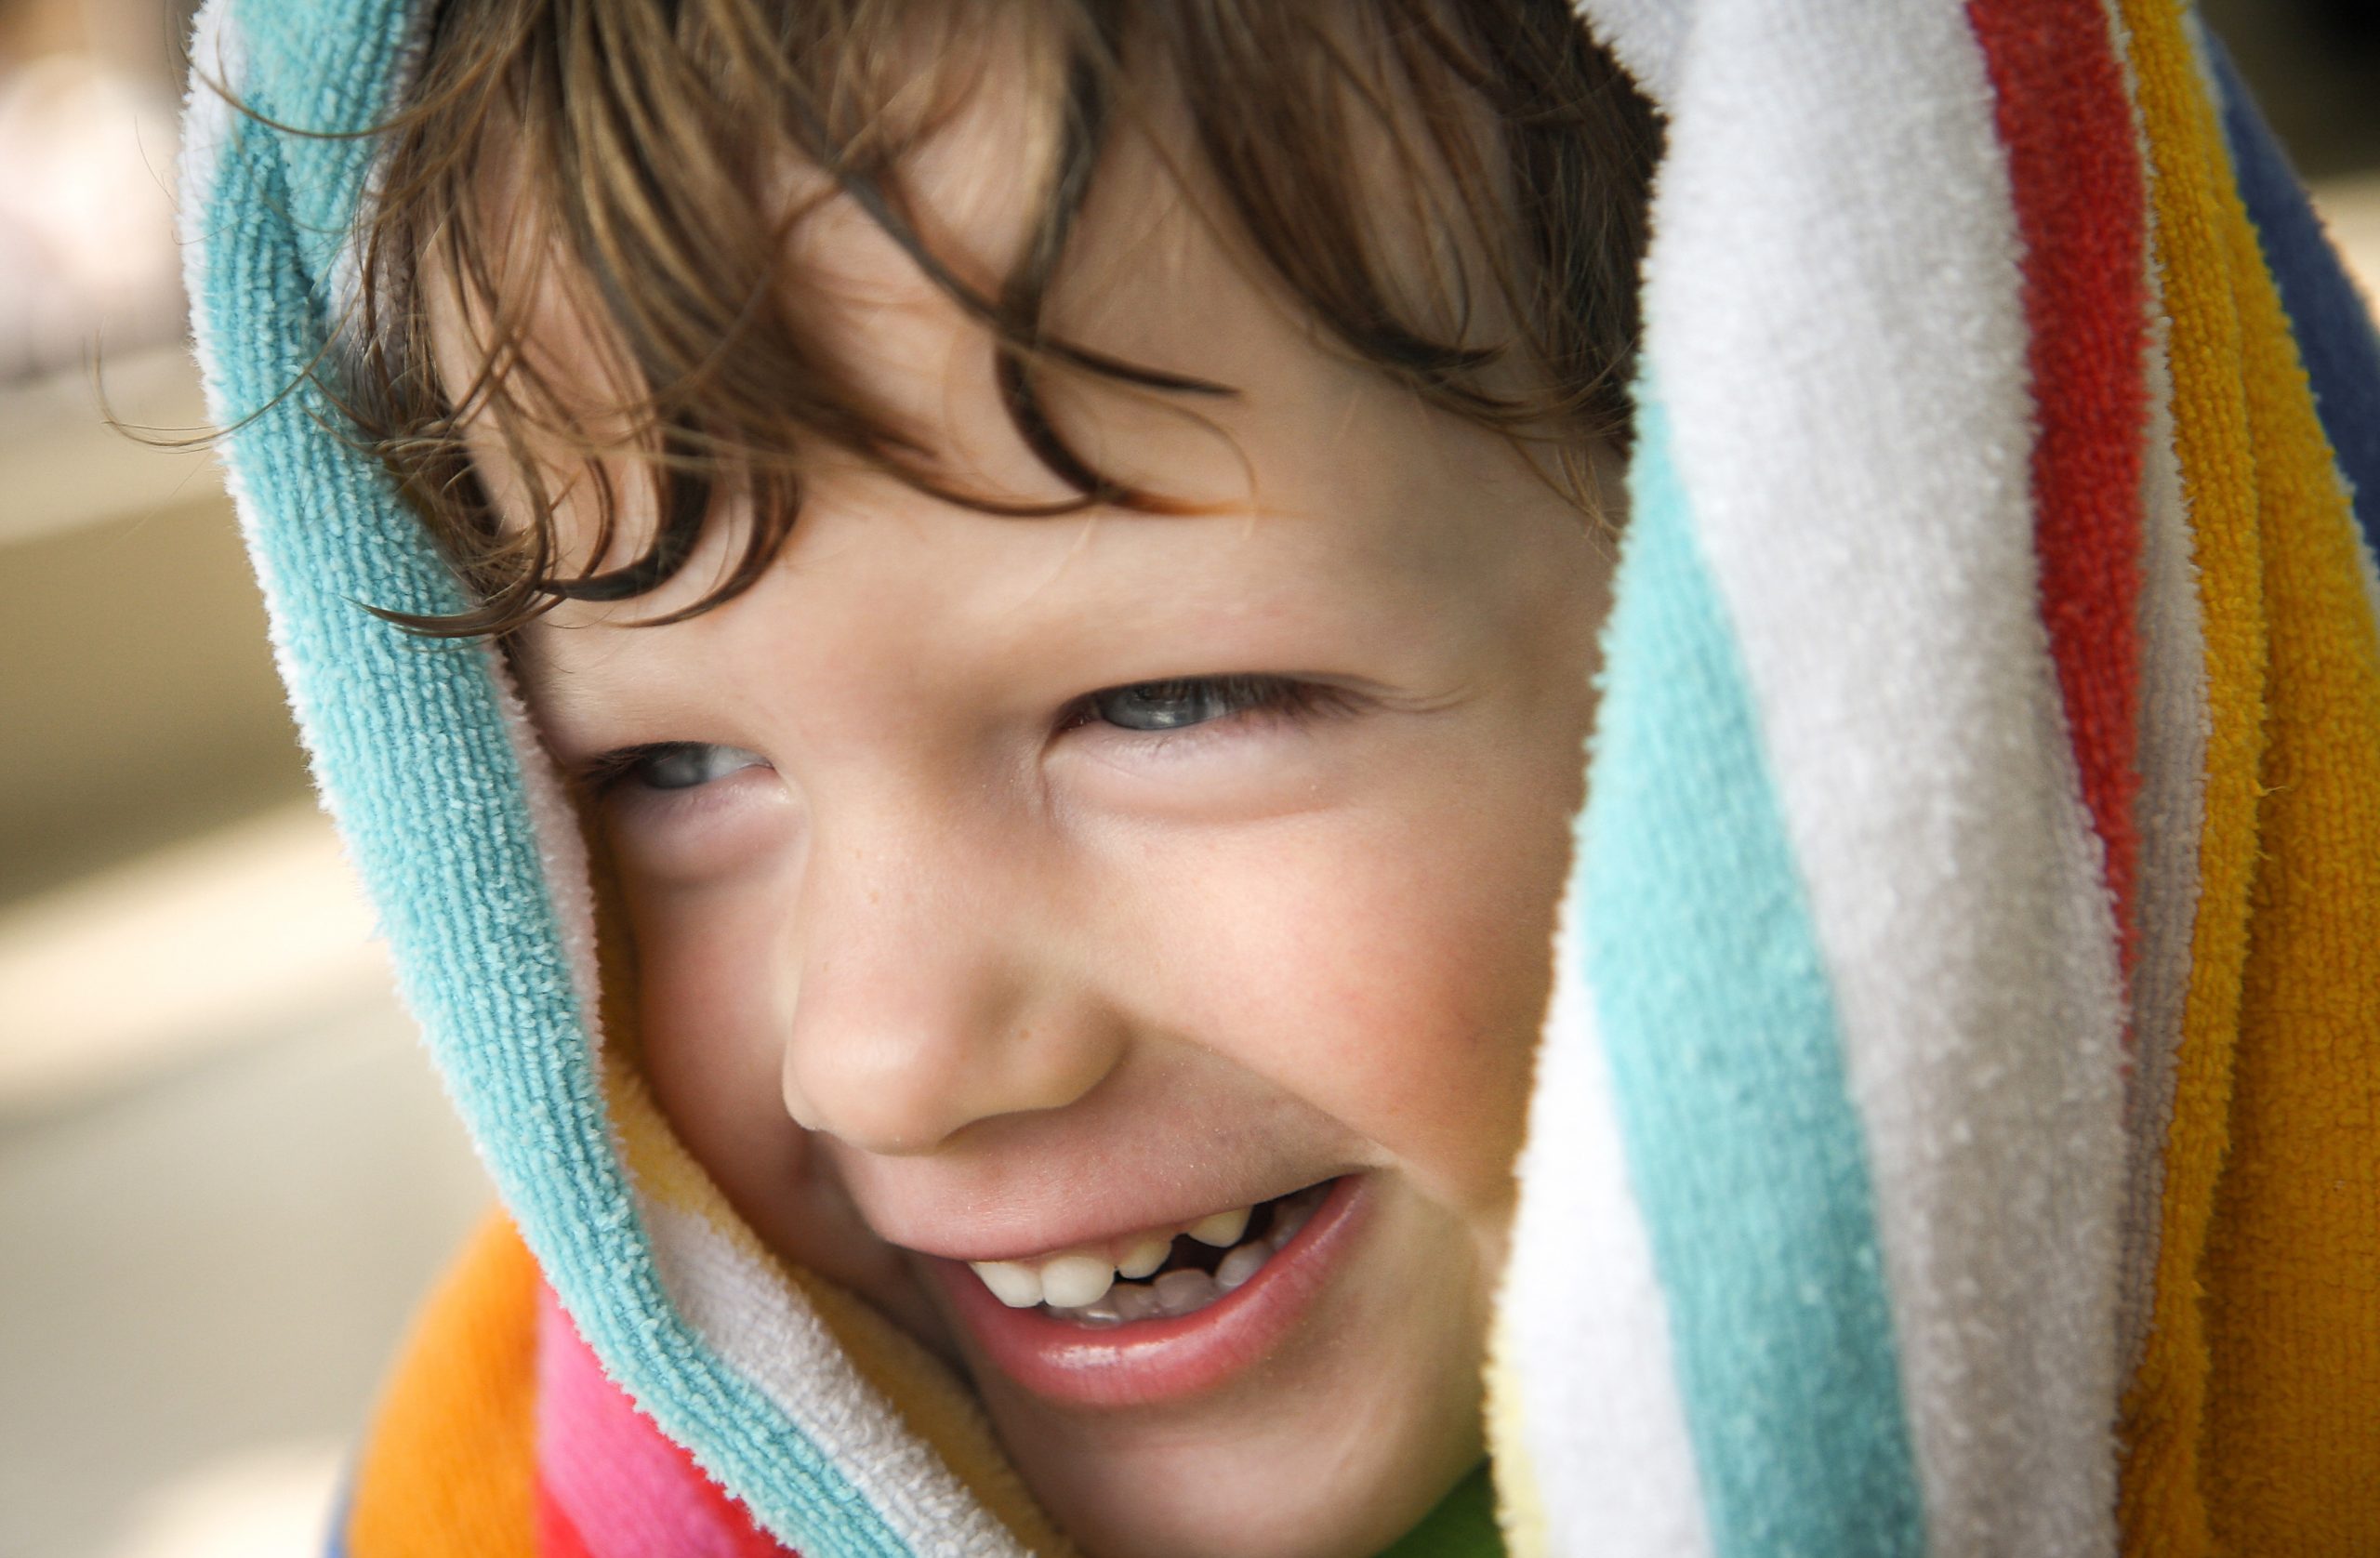 A young boy with a towel wrapped around his head smiles while drying off after getting out of a pool.